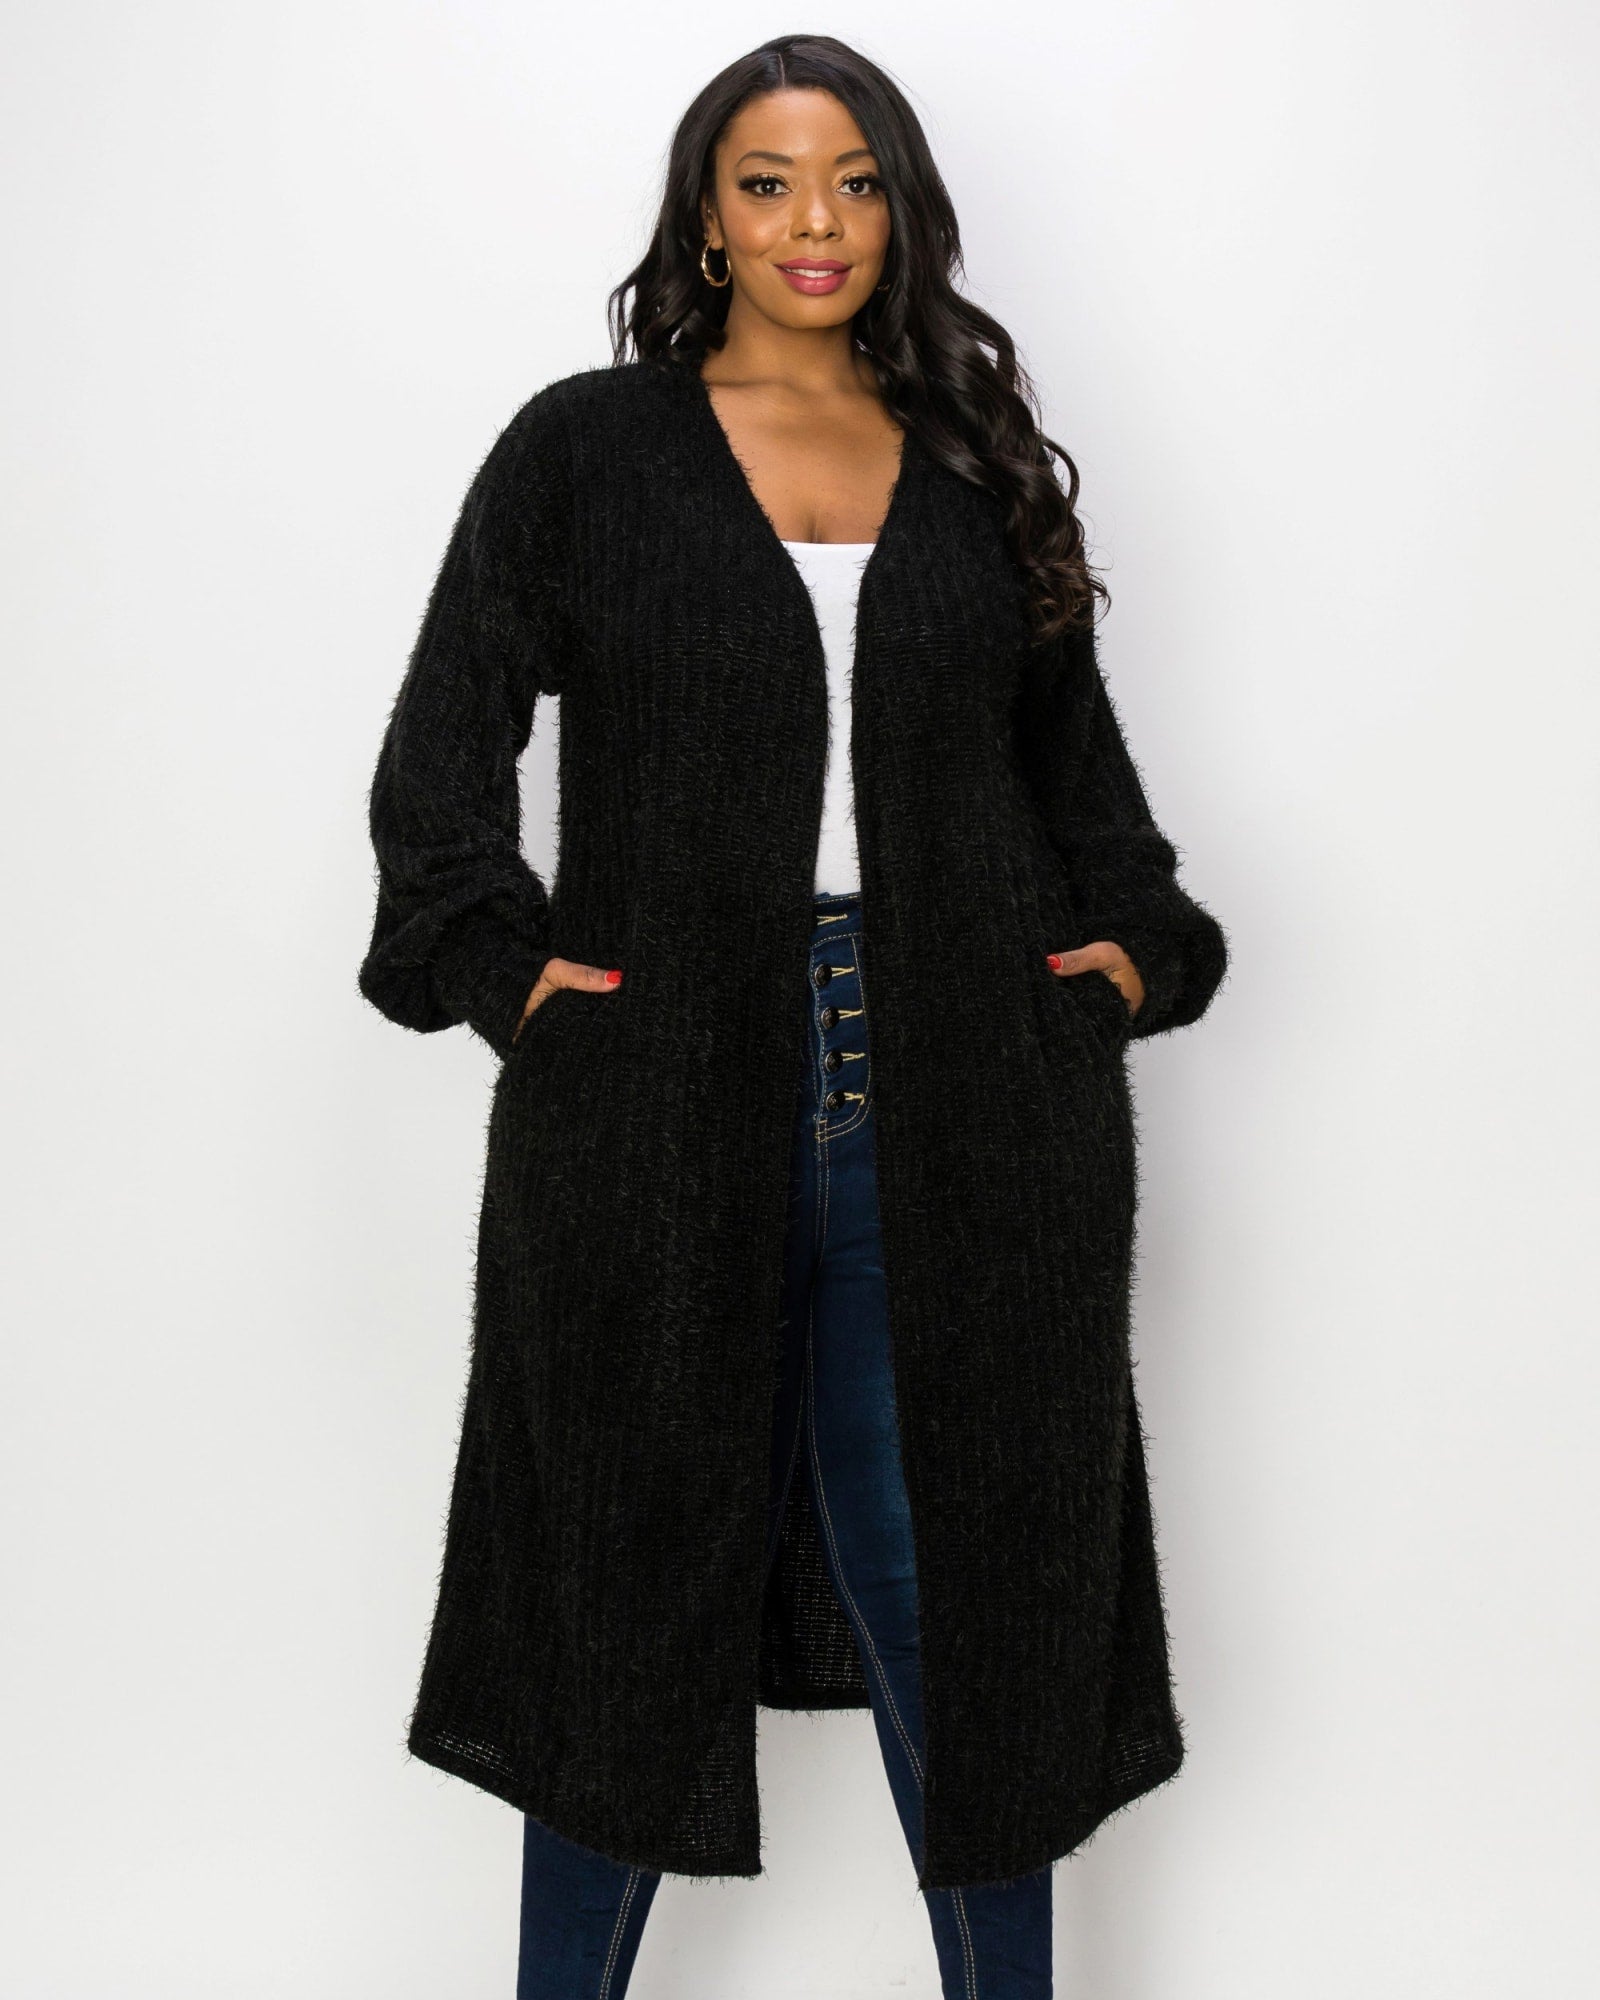 Plus Size Sweater Outfits